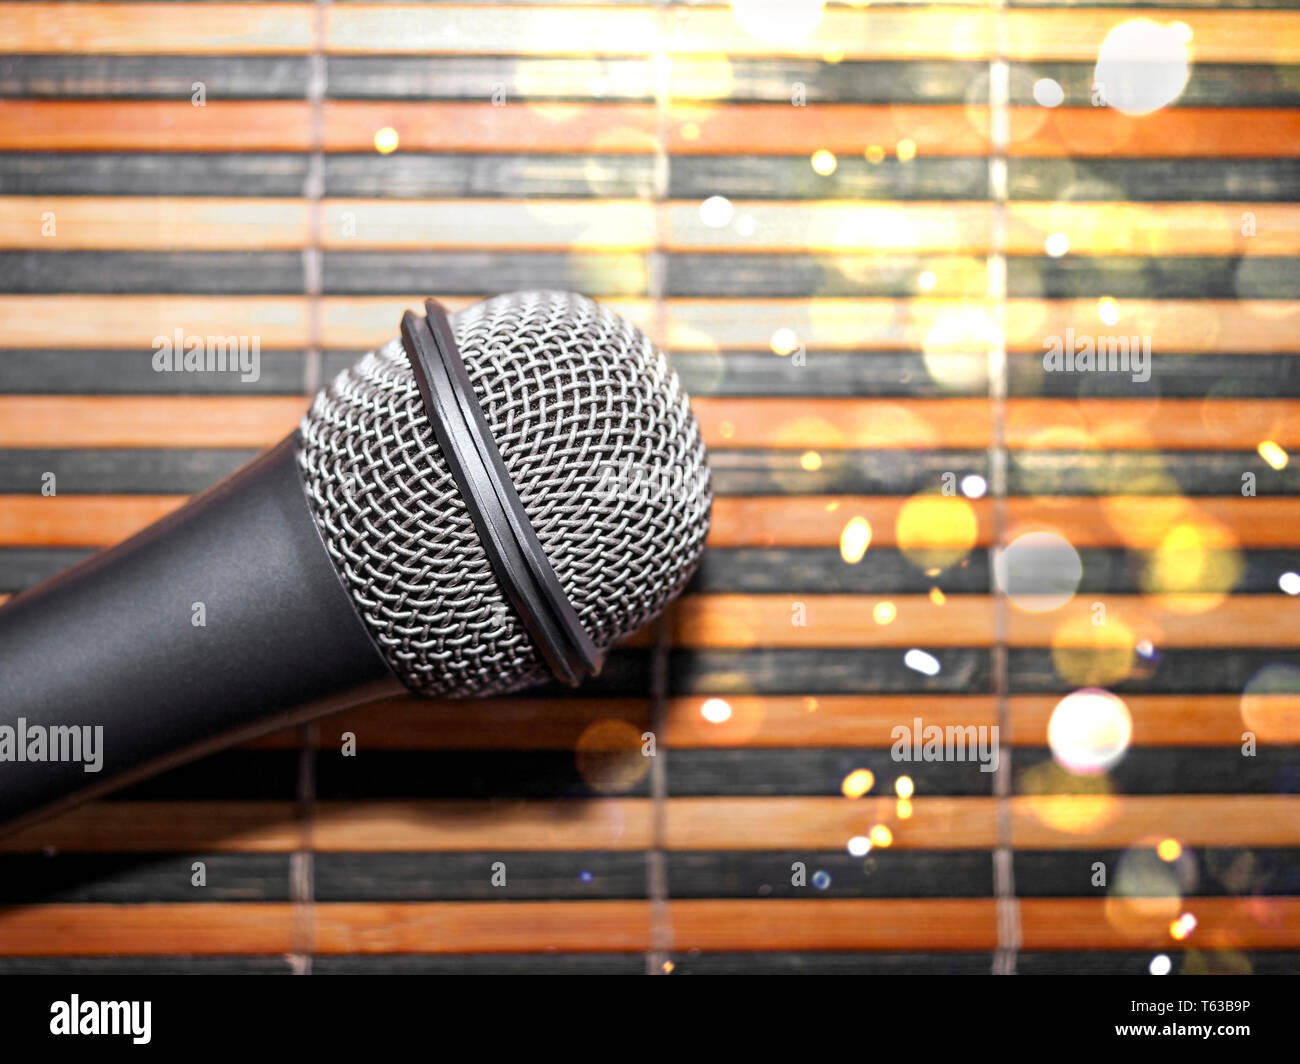 Top-Down View of a Microphone Head on a Striped Yellow and Black Bamboo Mat Background. Round Golden Celebration Soft Lights. Karaoke Bar, Holiday, Fe Stock Photo